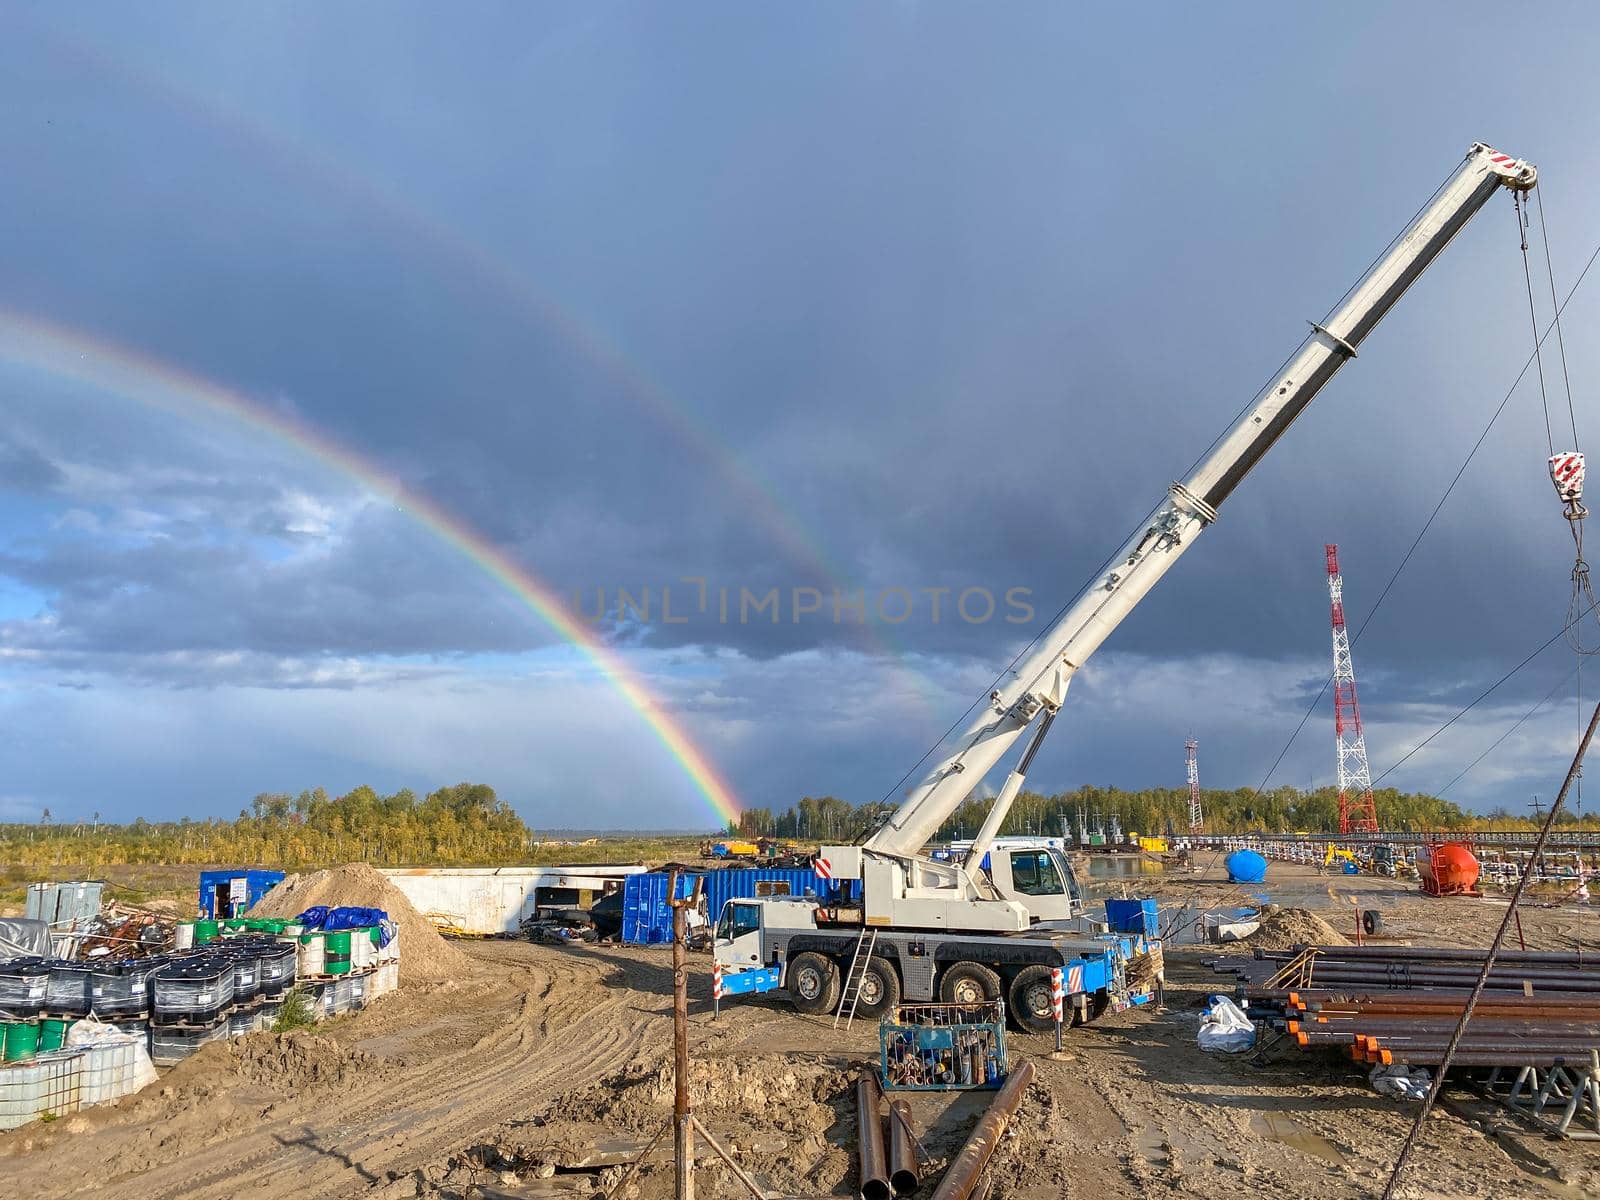 Oil field in the north, rainbow in the background. Working machines on the rig installation.